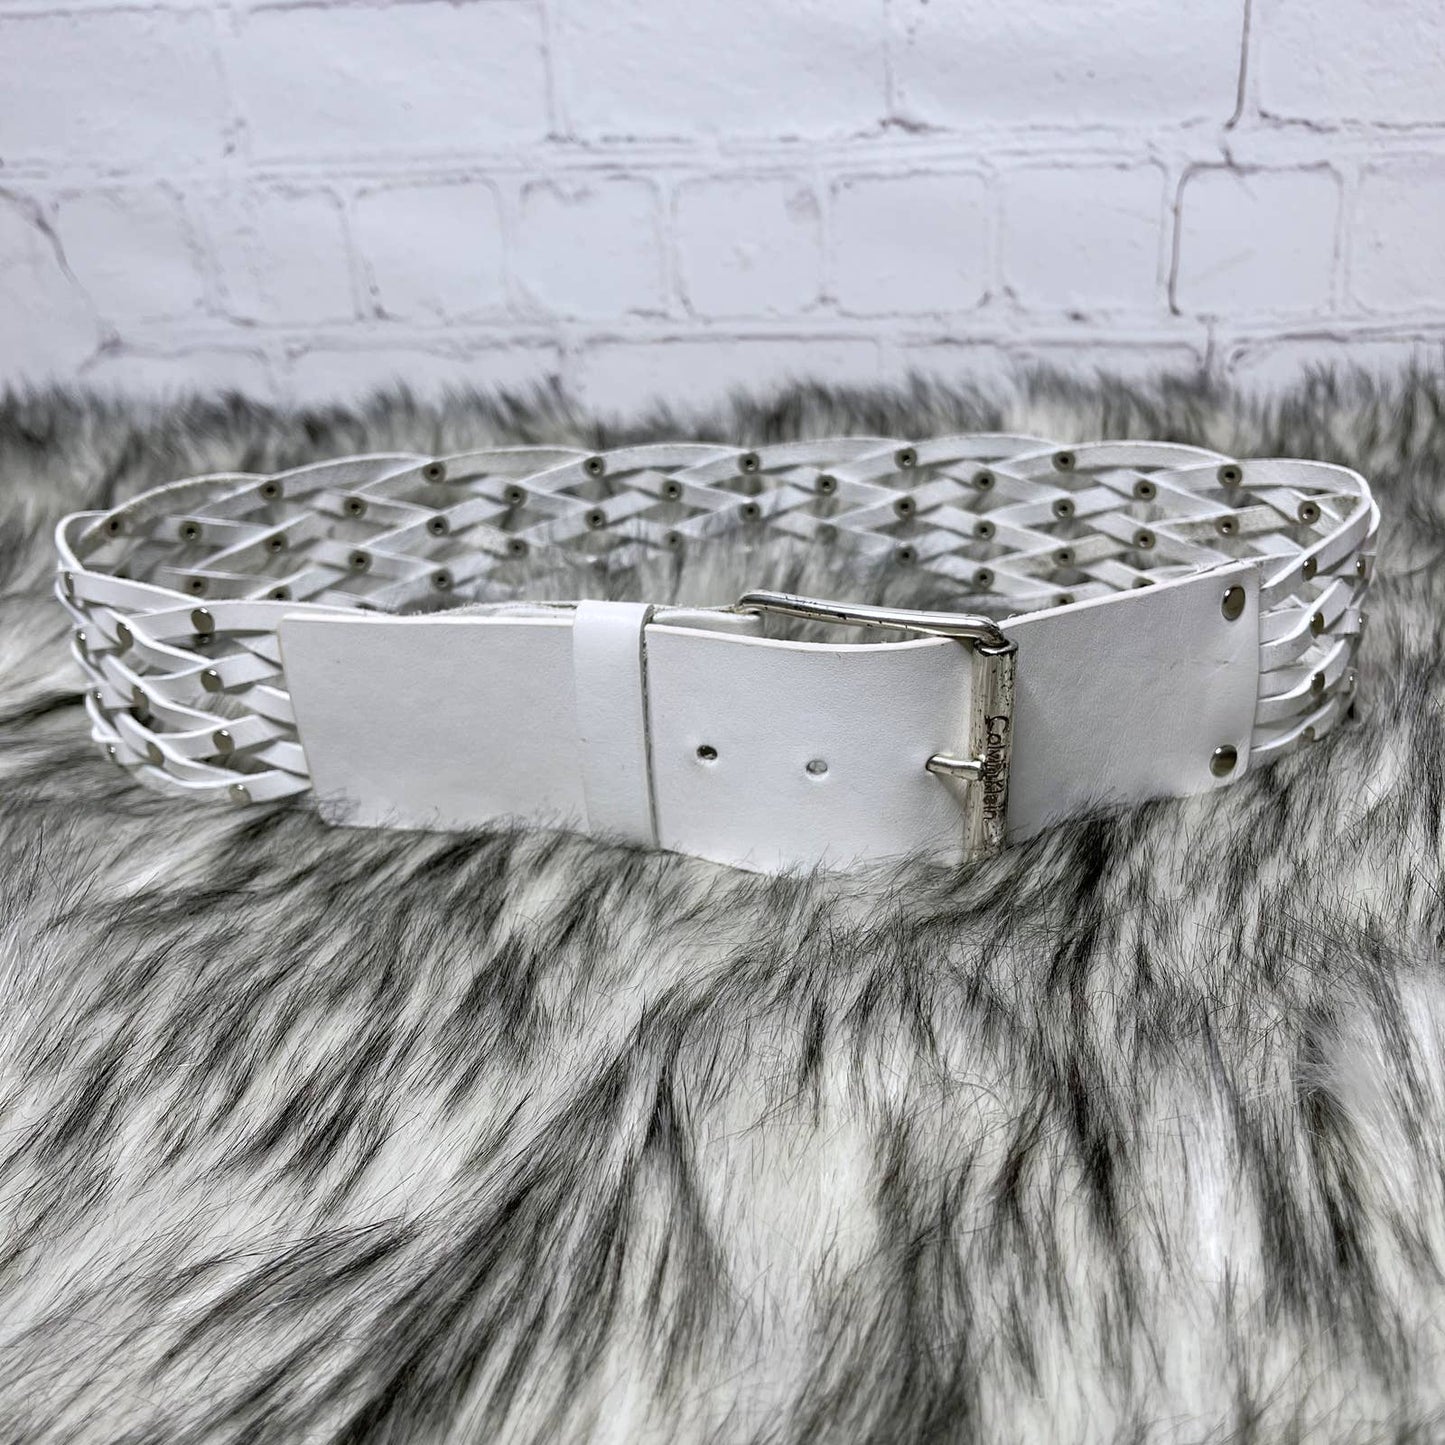 Vintage 90s Woven Leather Belt White with Silver Studs Calvin Klein Size S